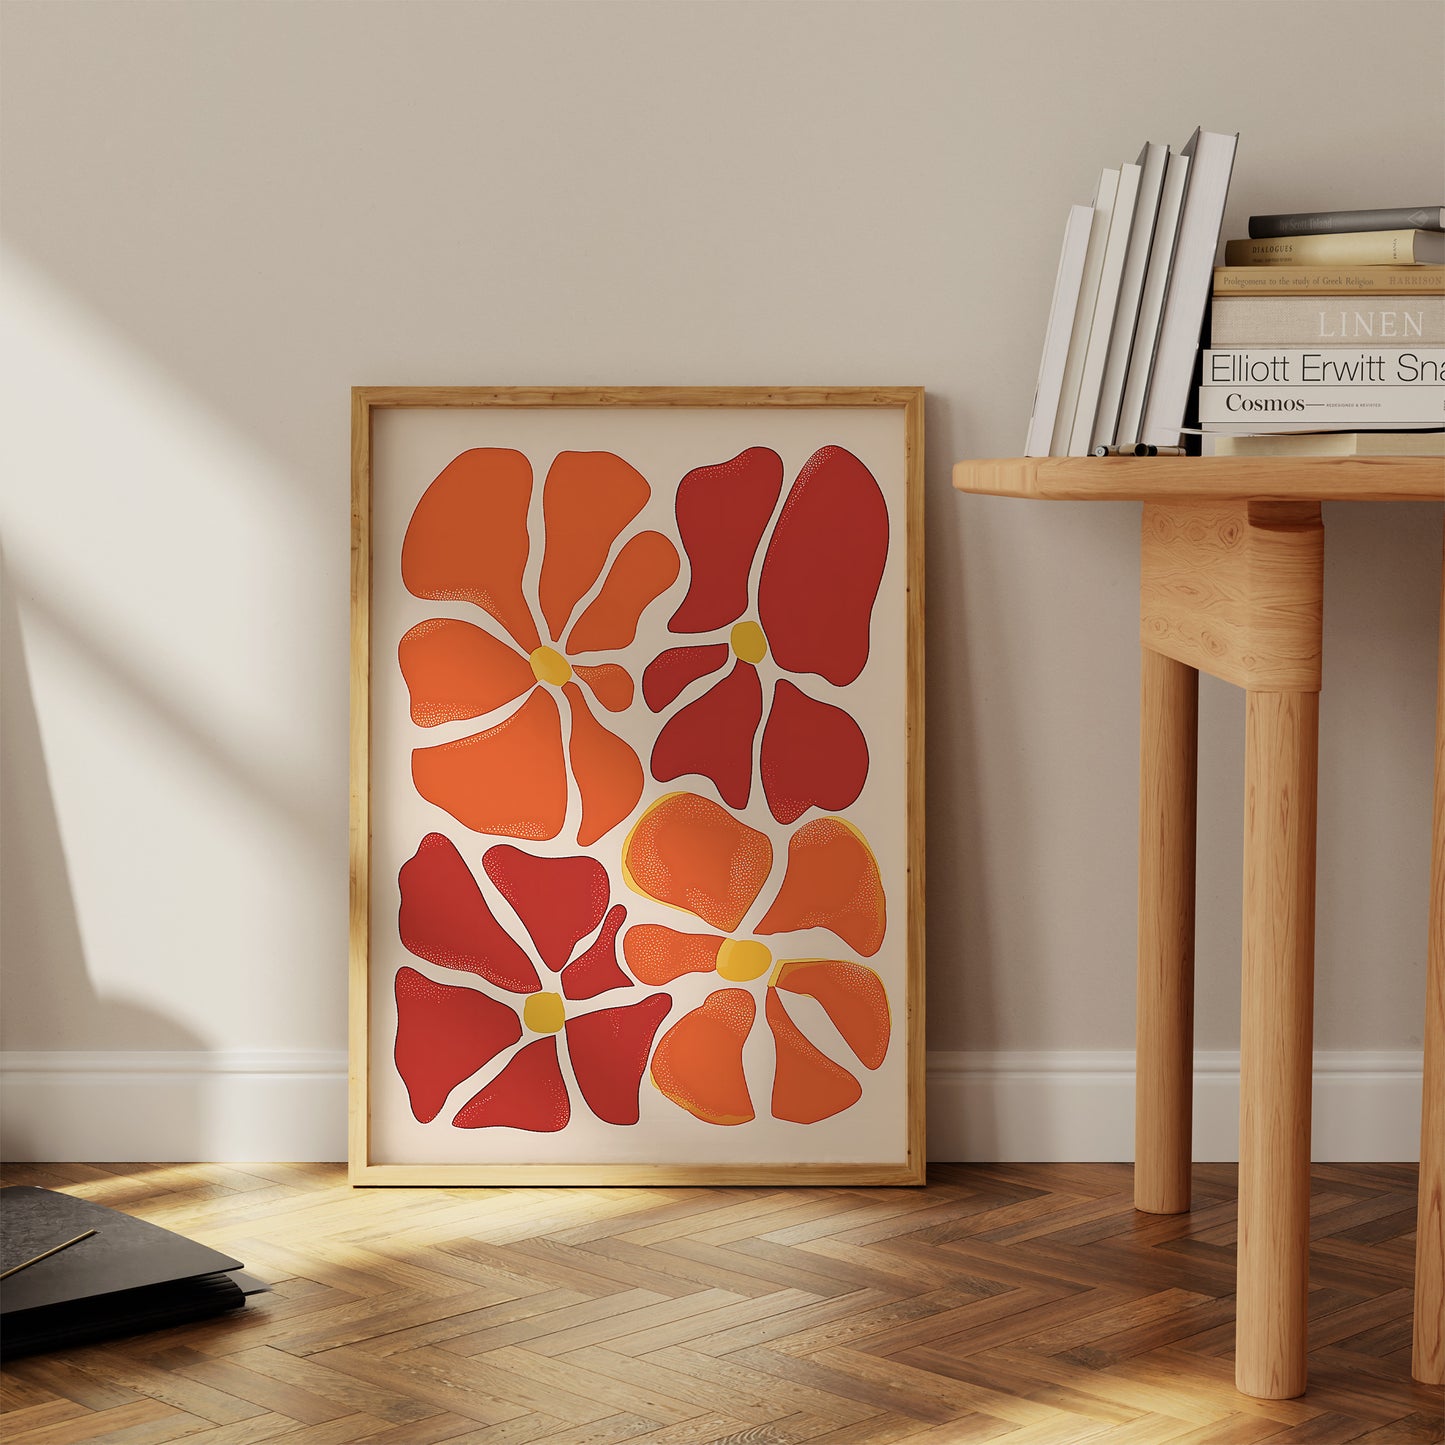 A framed abstract artwork with red and orange shapes beside a wooden table with books.